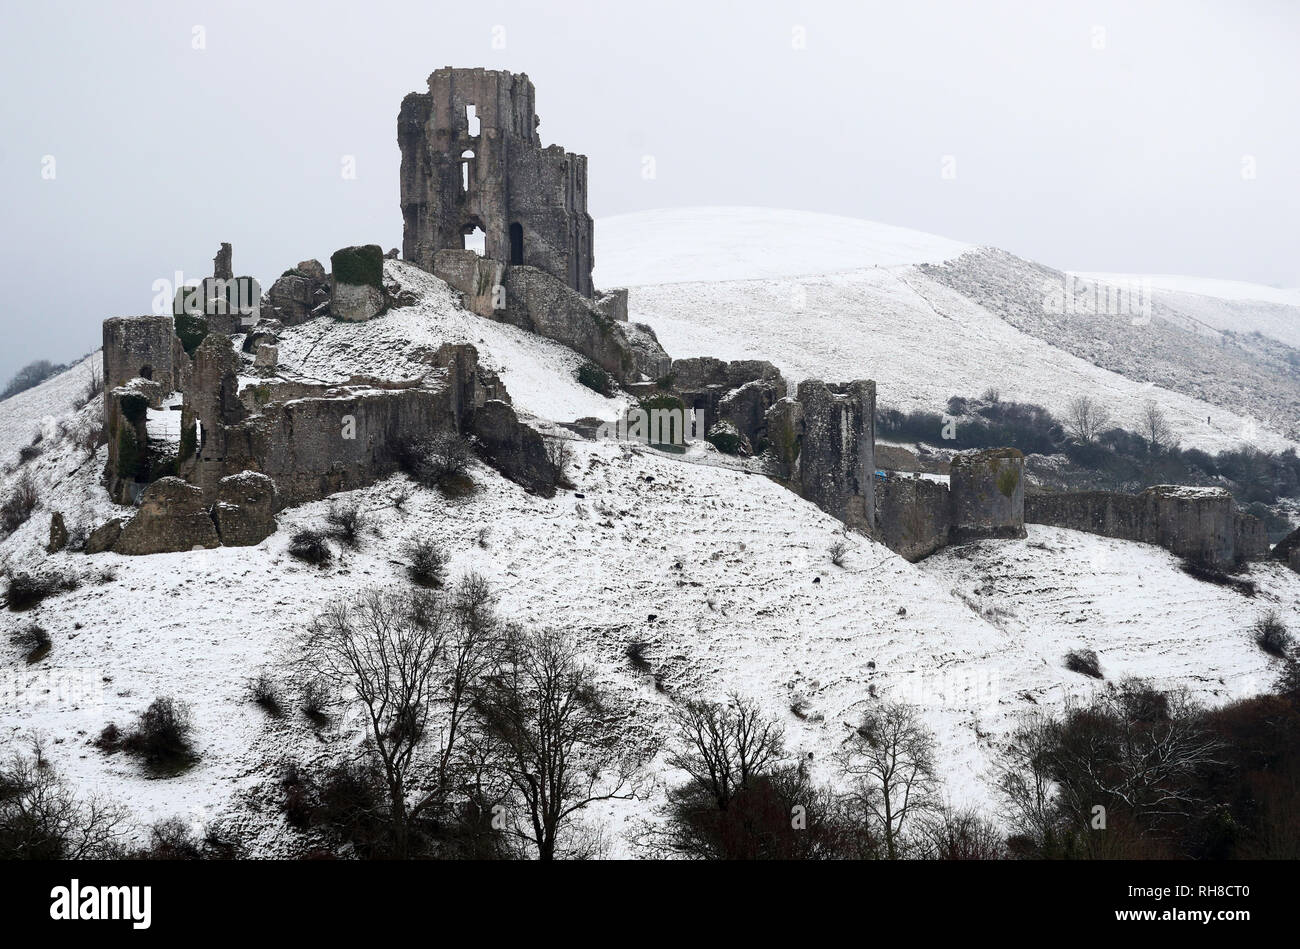 Snow covers the ground around Corfe Castle in Dorset. Snowfall and icy conditions are expected to cause widespread travel disruption after temperatures plummeted as low as minus 15.4C (4.3F) overnight. Stock Photo